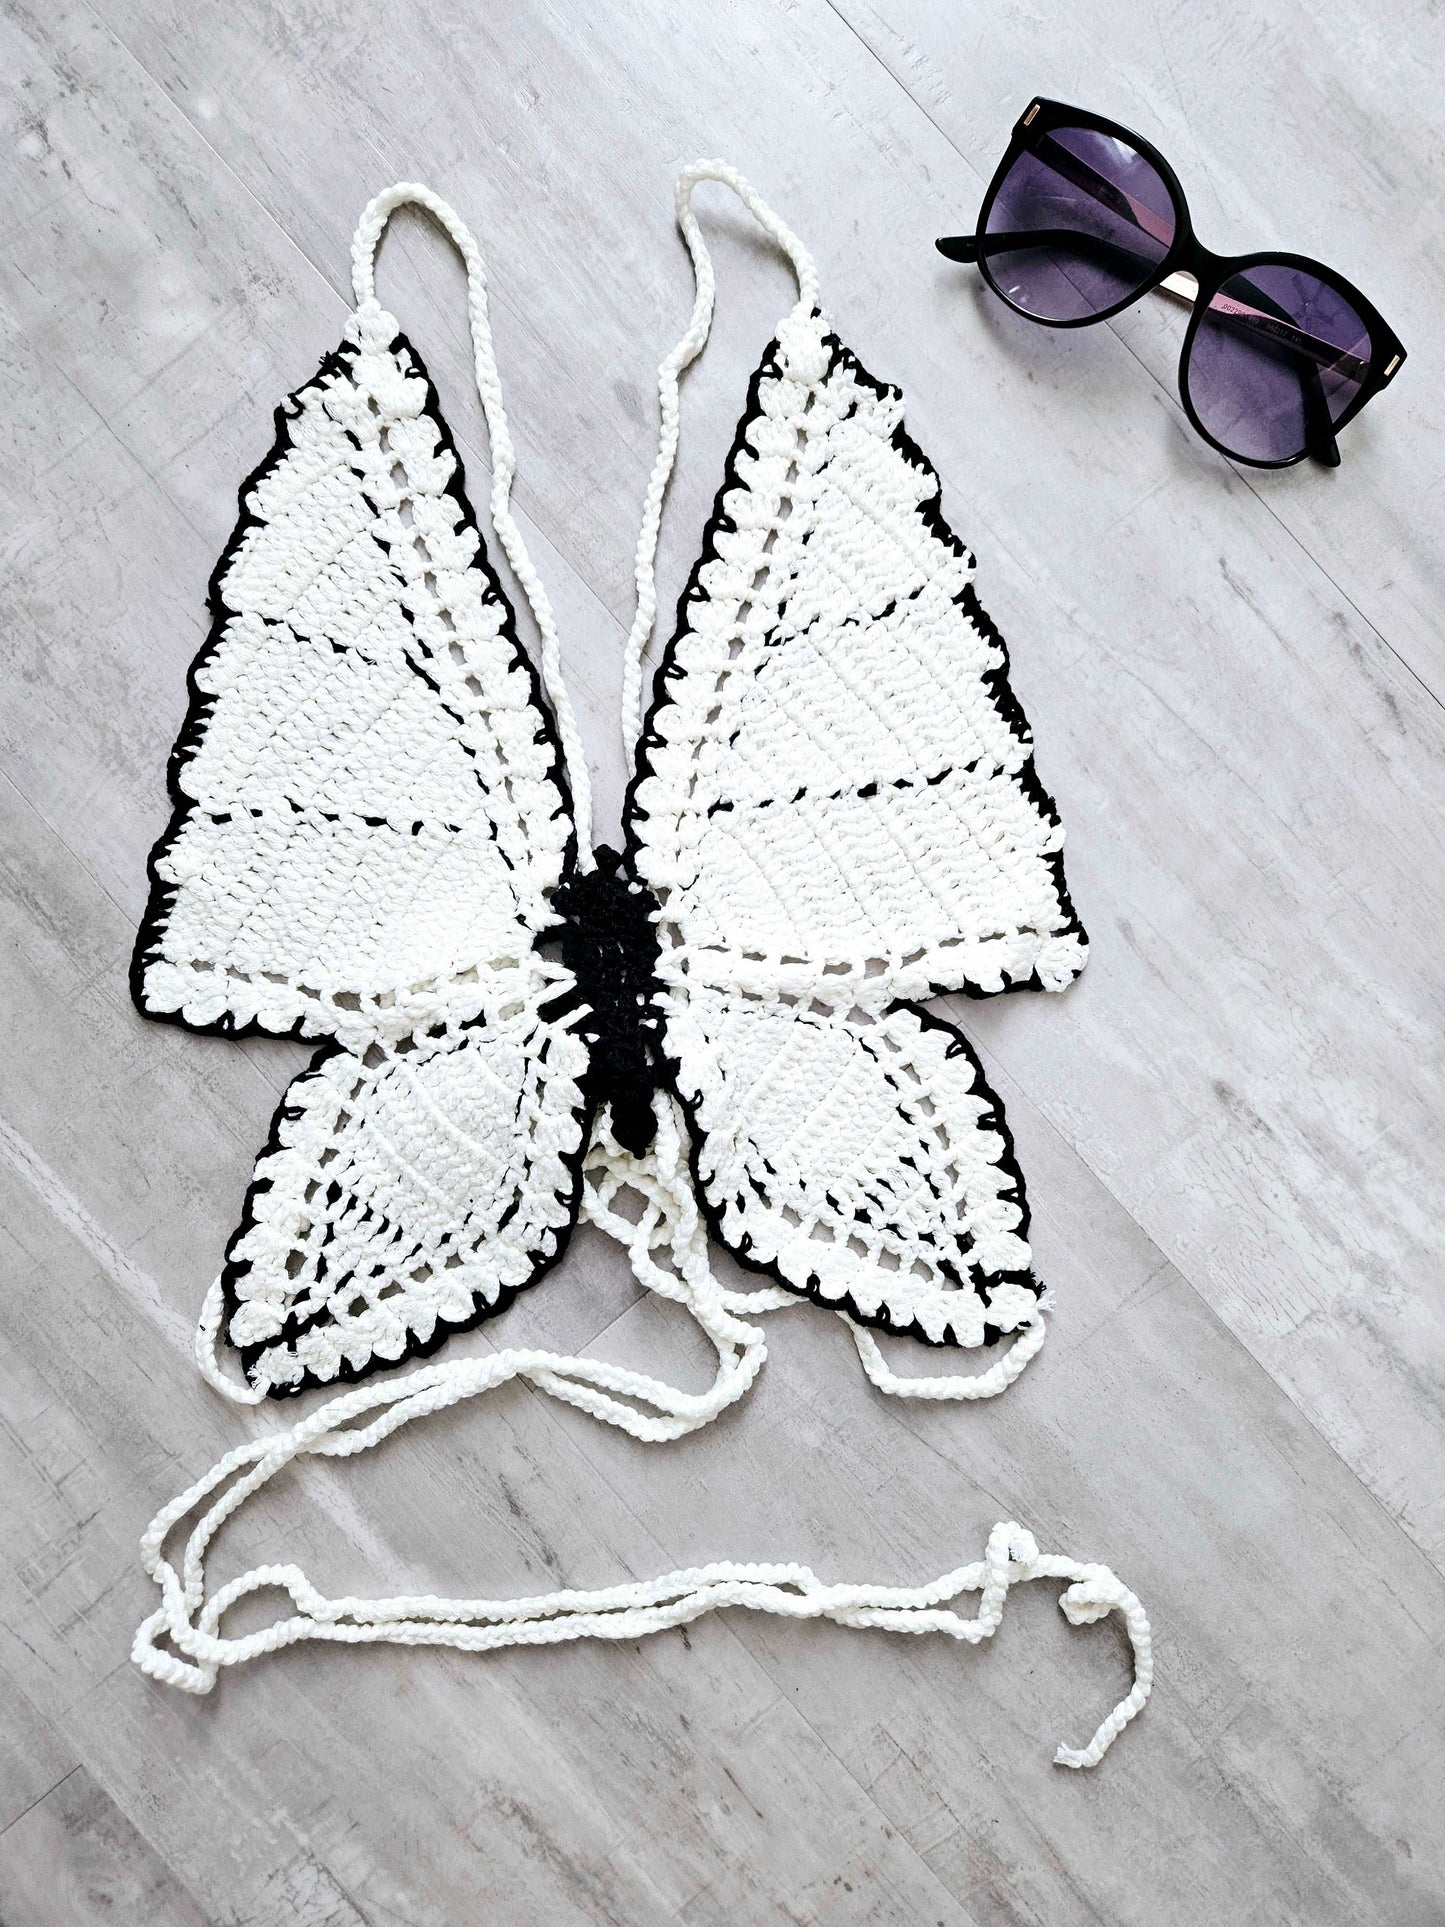 Handmade Crochet Top - Butterfly Pattern in Off-White and Black, Adjustable Tie Straps